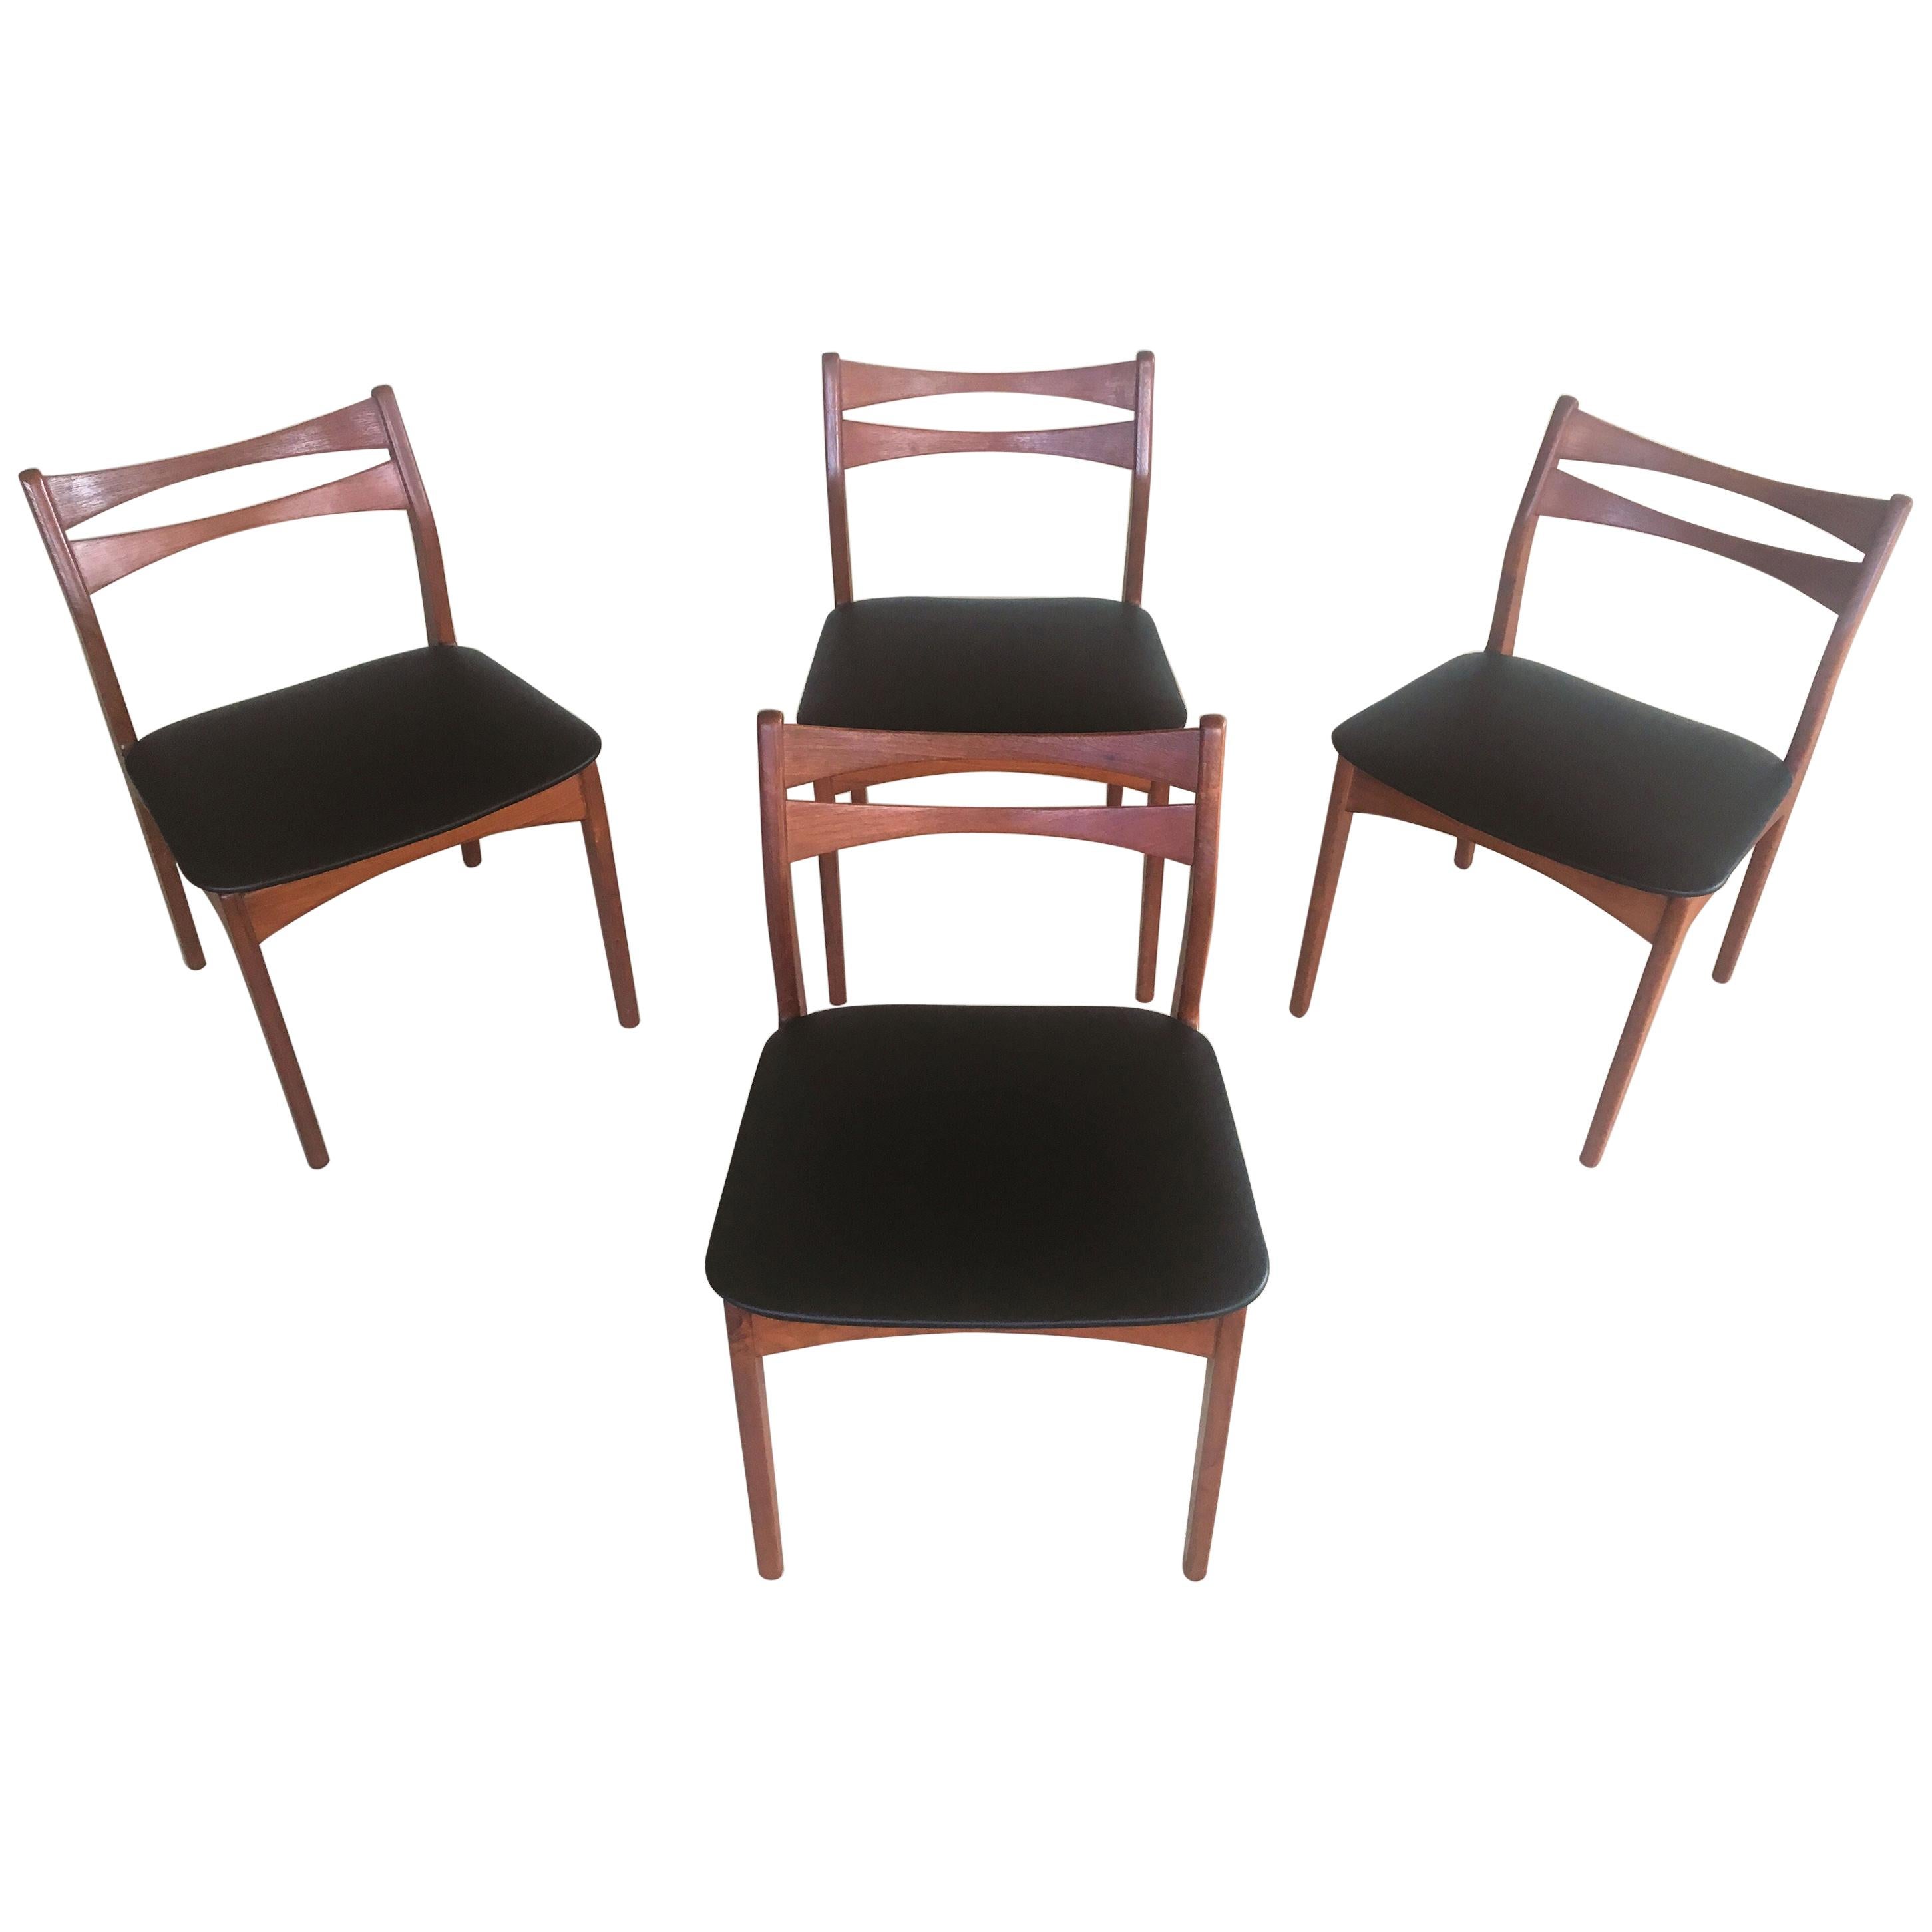 1960s Set of Four Danish Teak Dining Chairs Reupholstered in Black Faux Leather